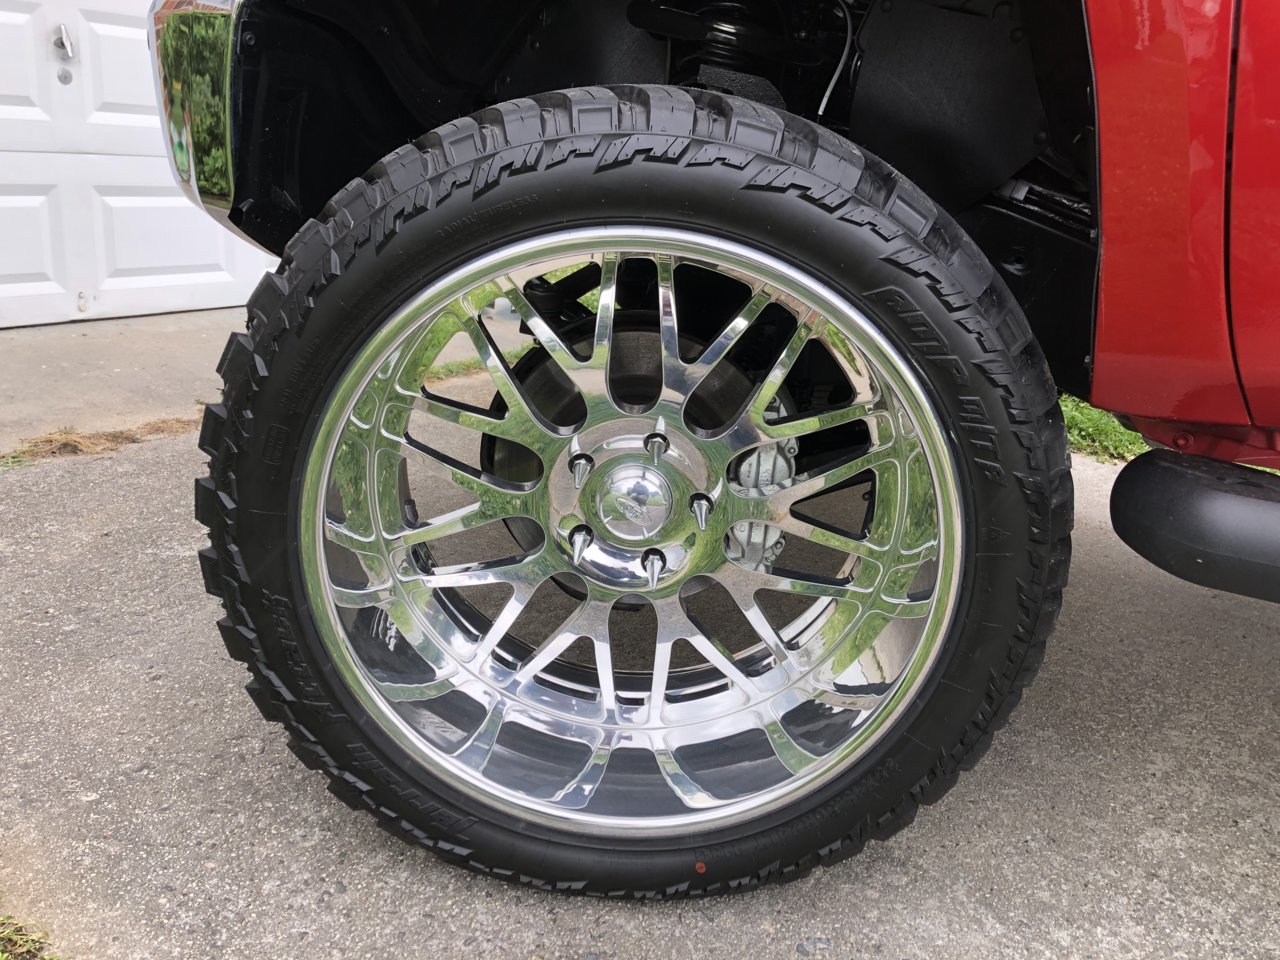 Official Tundra Wheel and Tire Setups - Pics and Info | Page 61 Are Castle Rock Tires Made In China